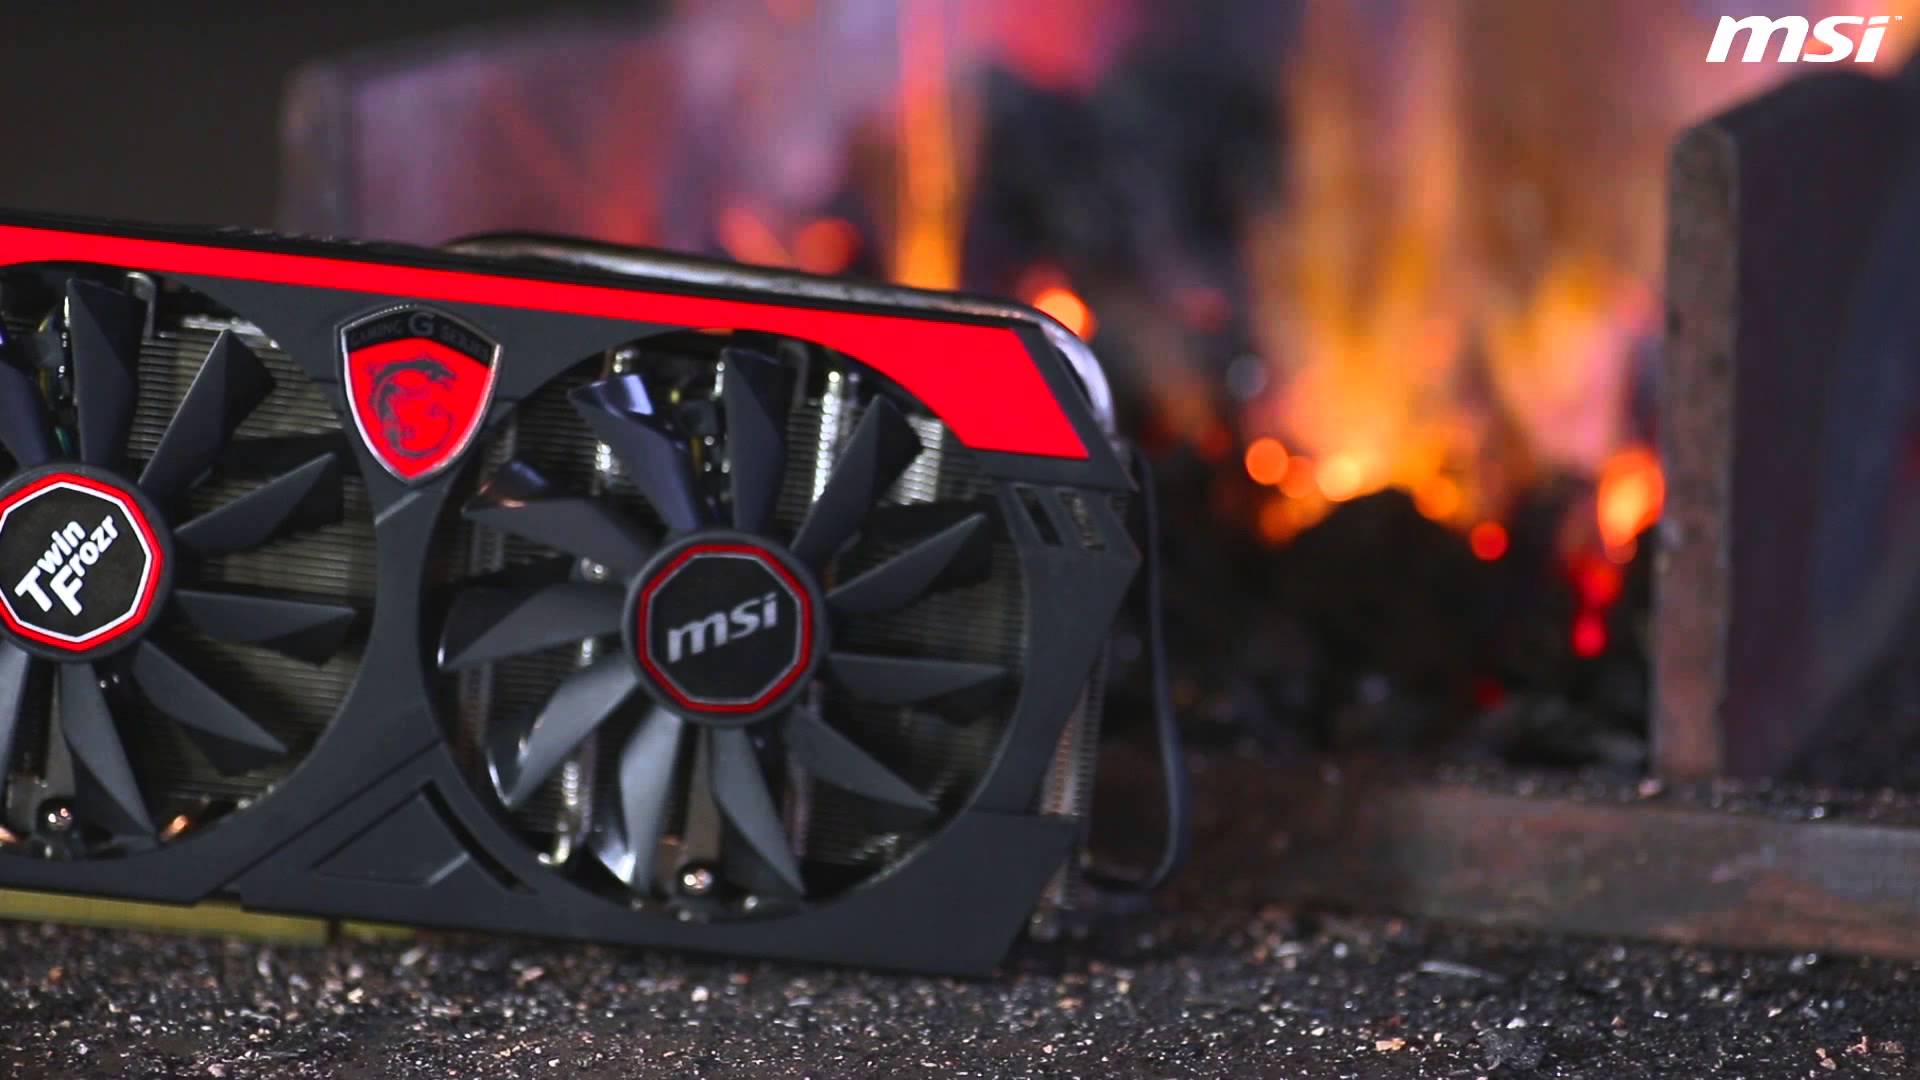 MSI GAMING cards, forged in the fire!